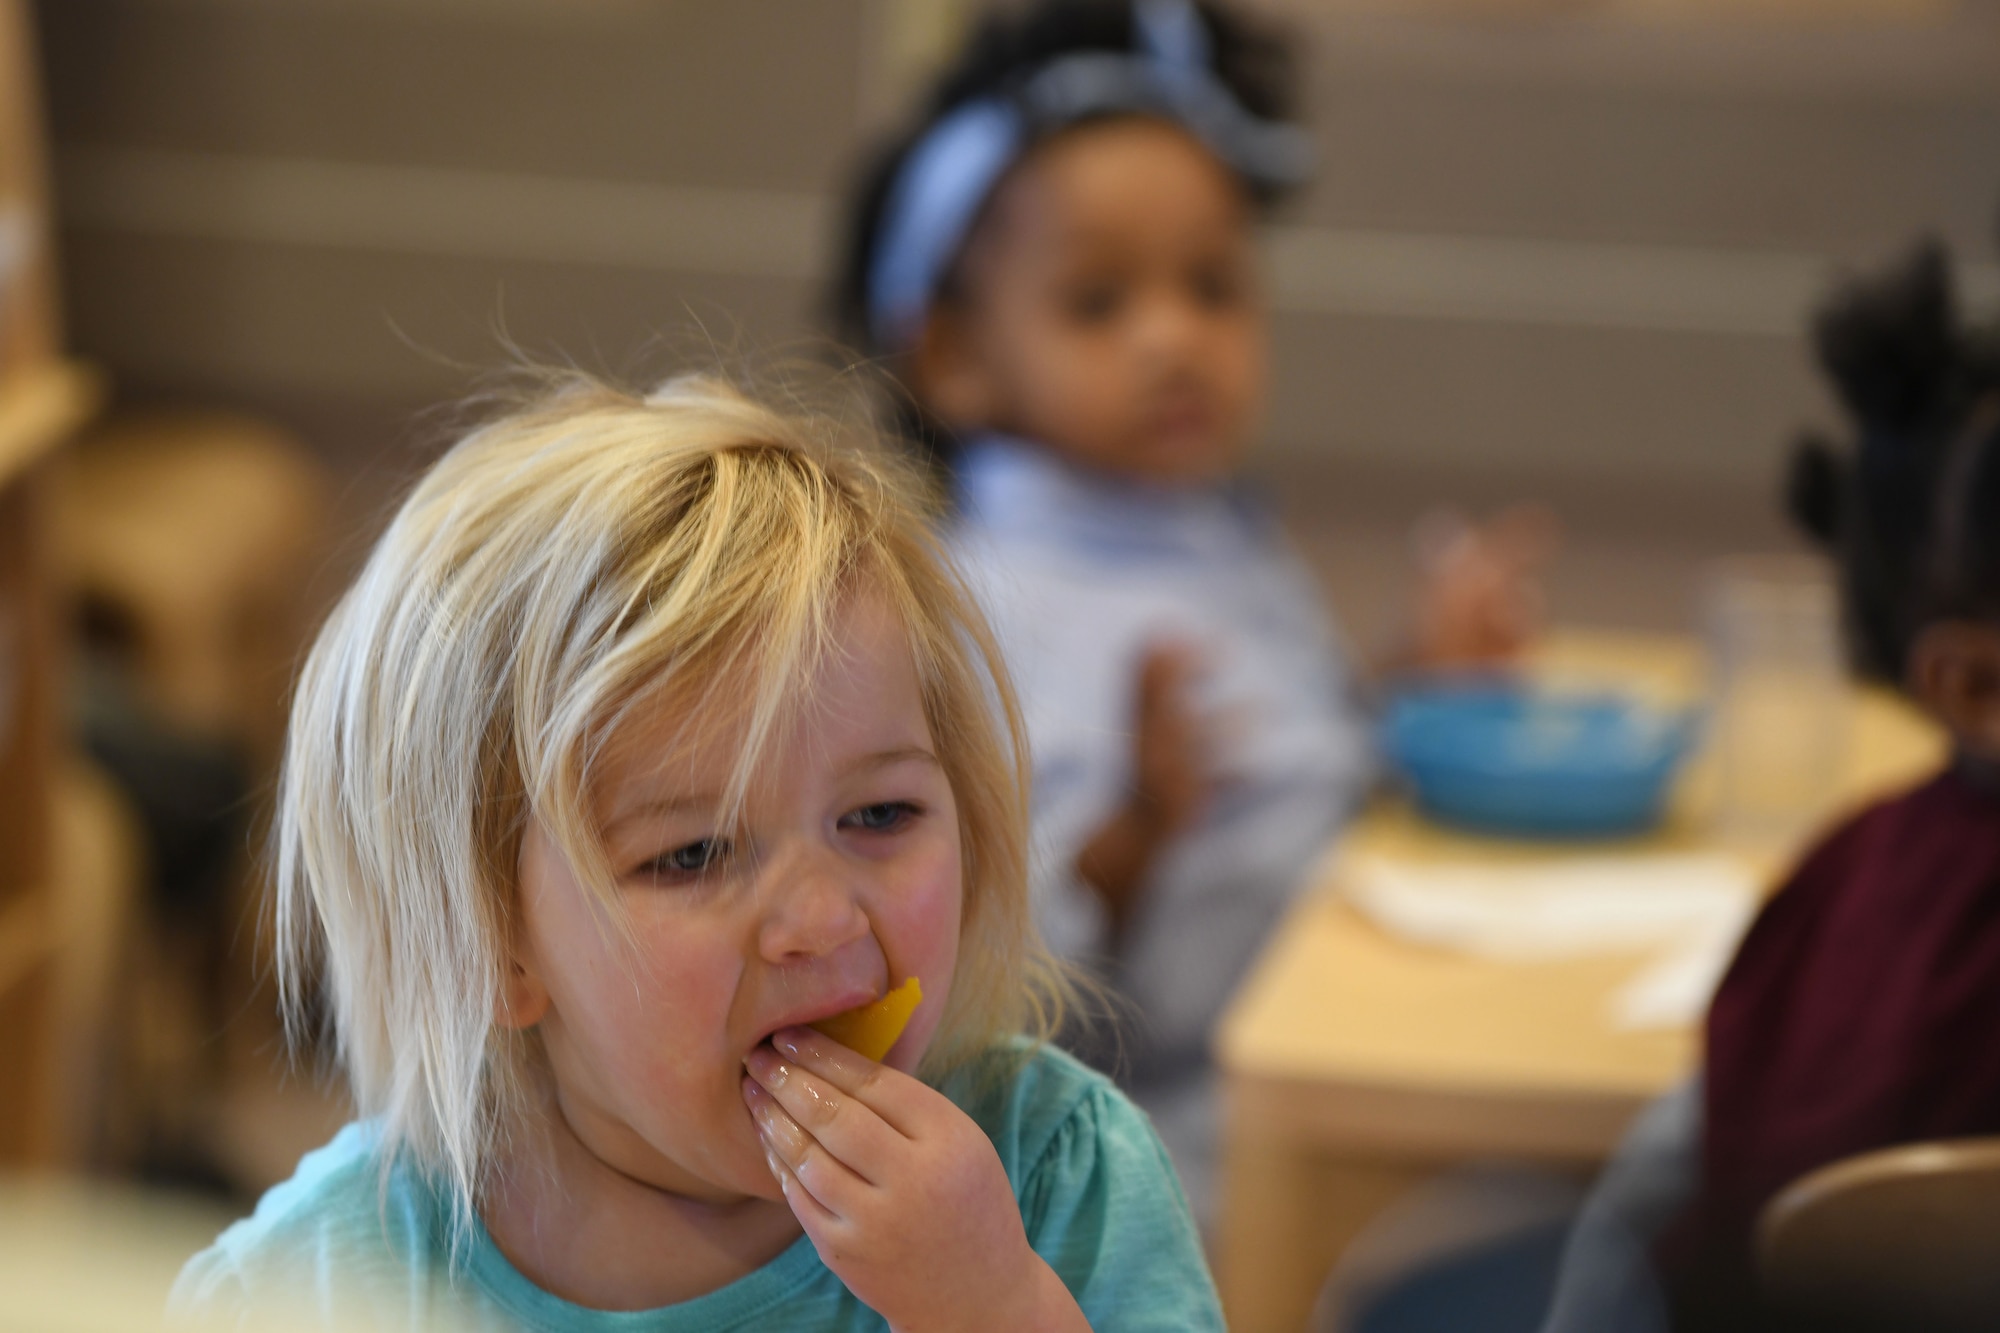 Jaidyn Mastalski, the daughter of 1st Lt. Michael Mastalski, a 28th Maintenance Squadron avionics officer, eats peaches and yogurt during snack time at the McRaven Child Development Center on Ellsworth Air Force Base, S.D., Dec. 6, 2018. The children at the CDC are provided with a nutritious breakfast, lunch and snacks throughout the day. (U.S. Air Force photo by Airman 1st Class Christina Bennett)